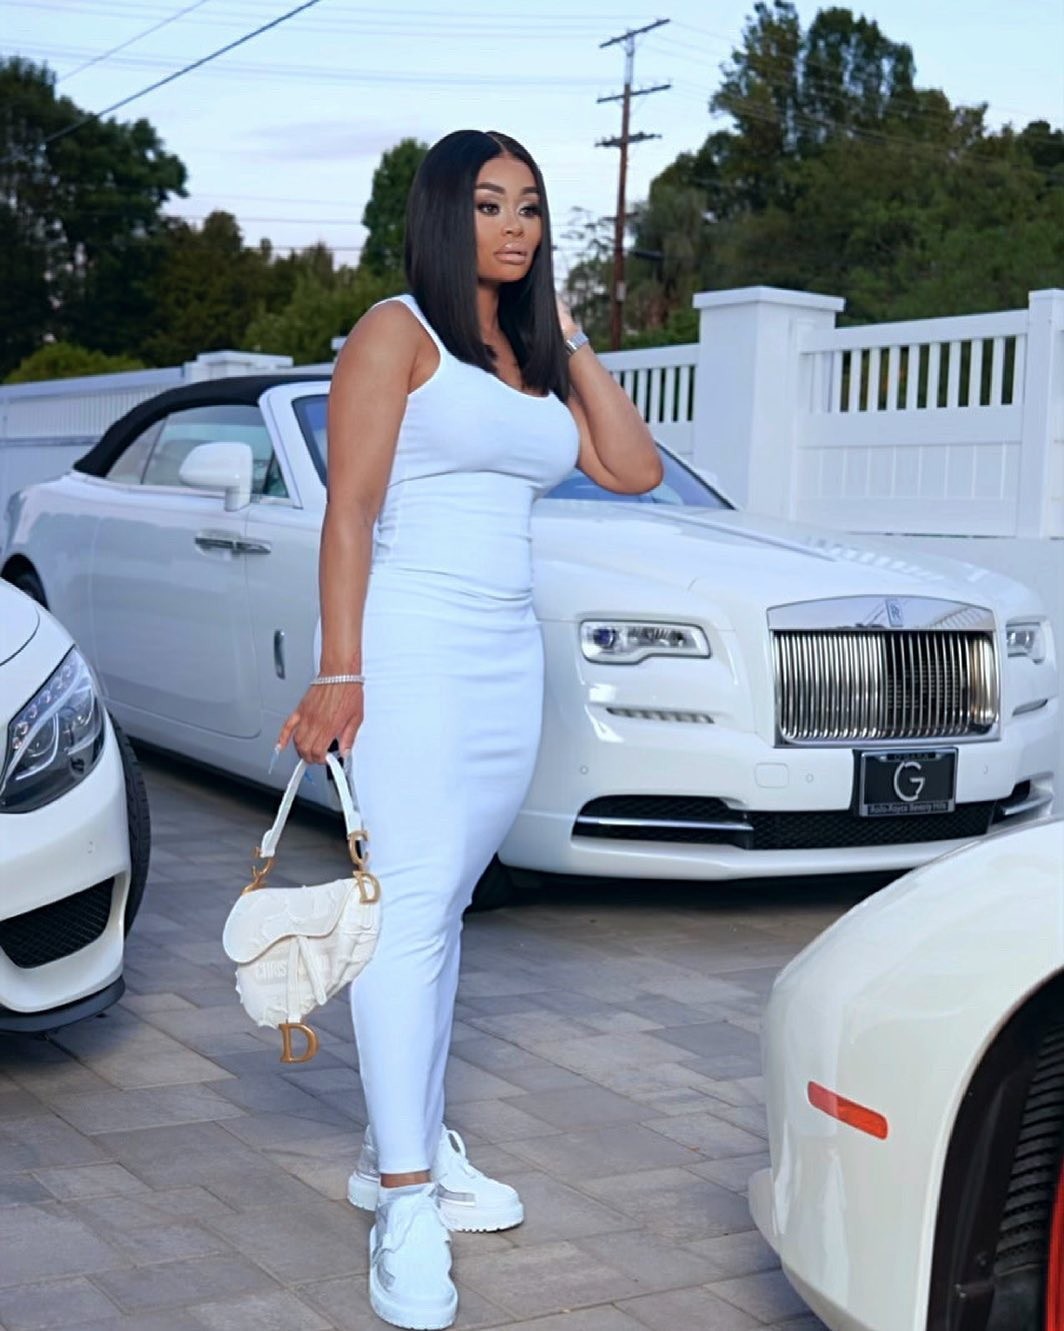 Blac Chyna Car Collection in 2022 - Real-Time Update on Model Blac Chyna's Dating Life, Net Worth, Mansion, and Biography